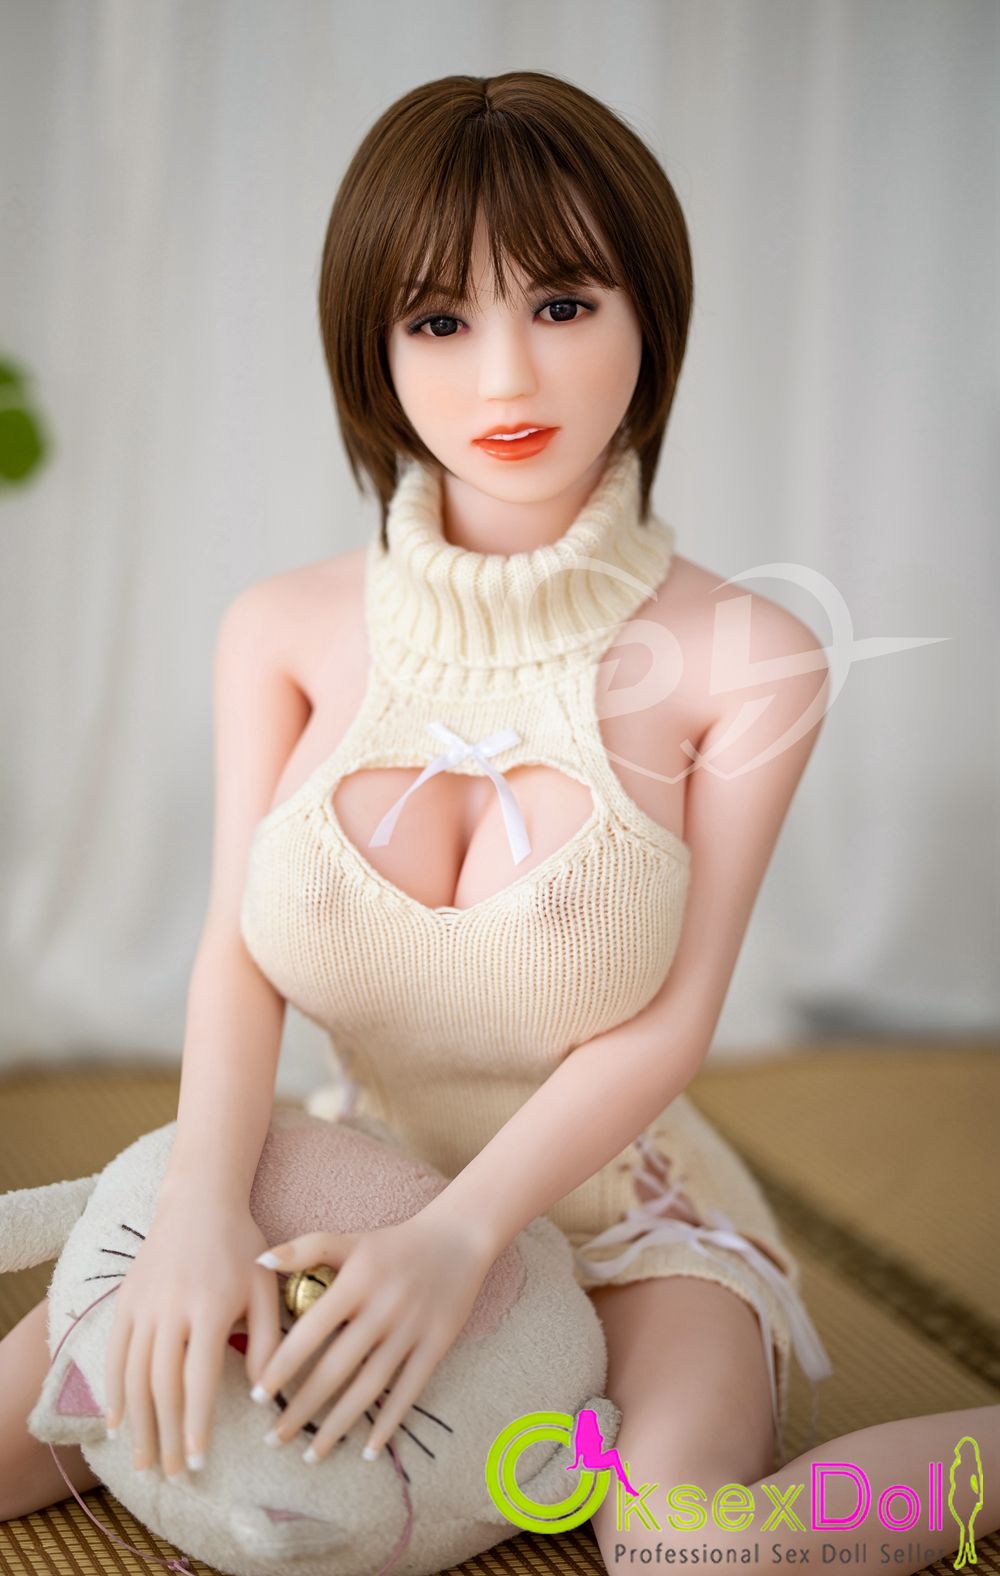 DL doll Pictures